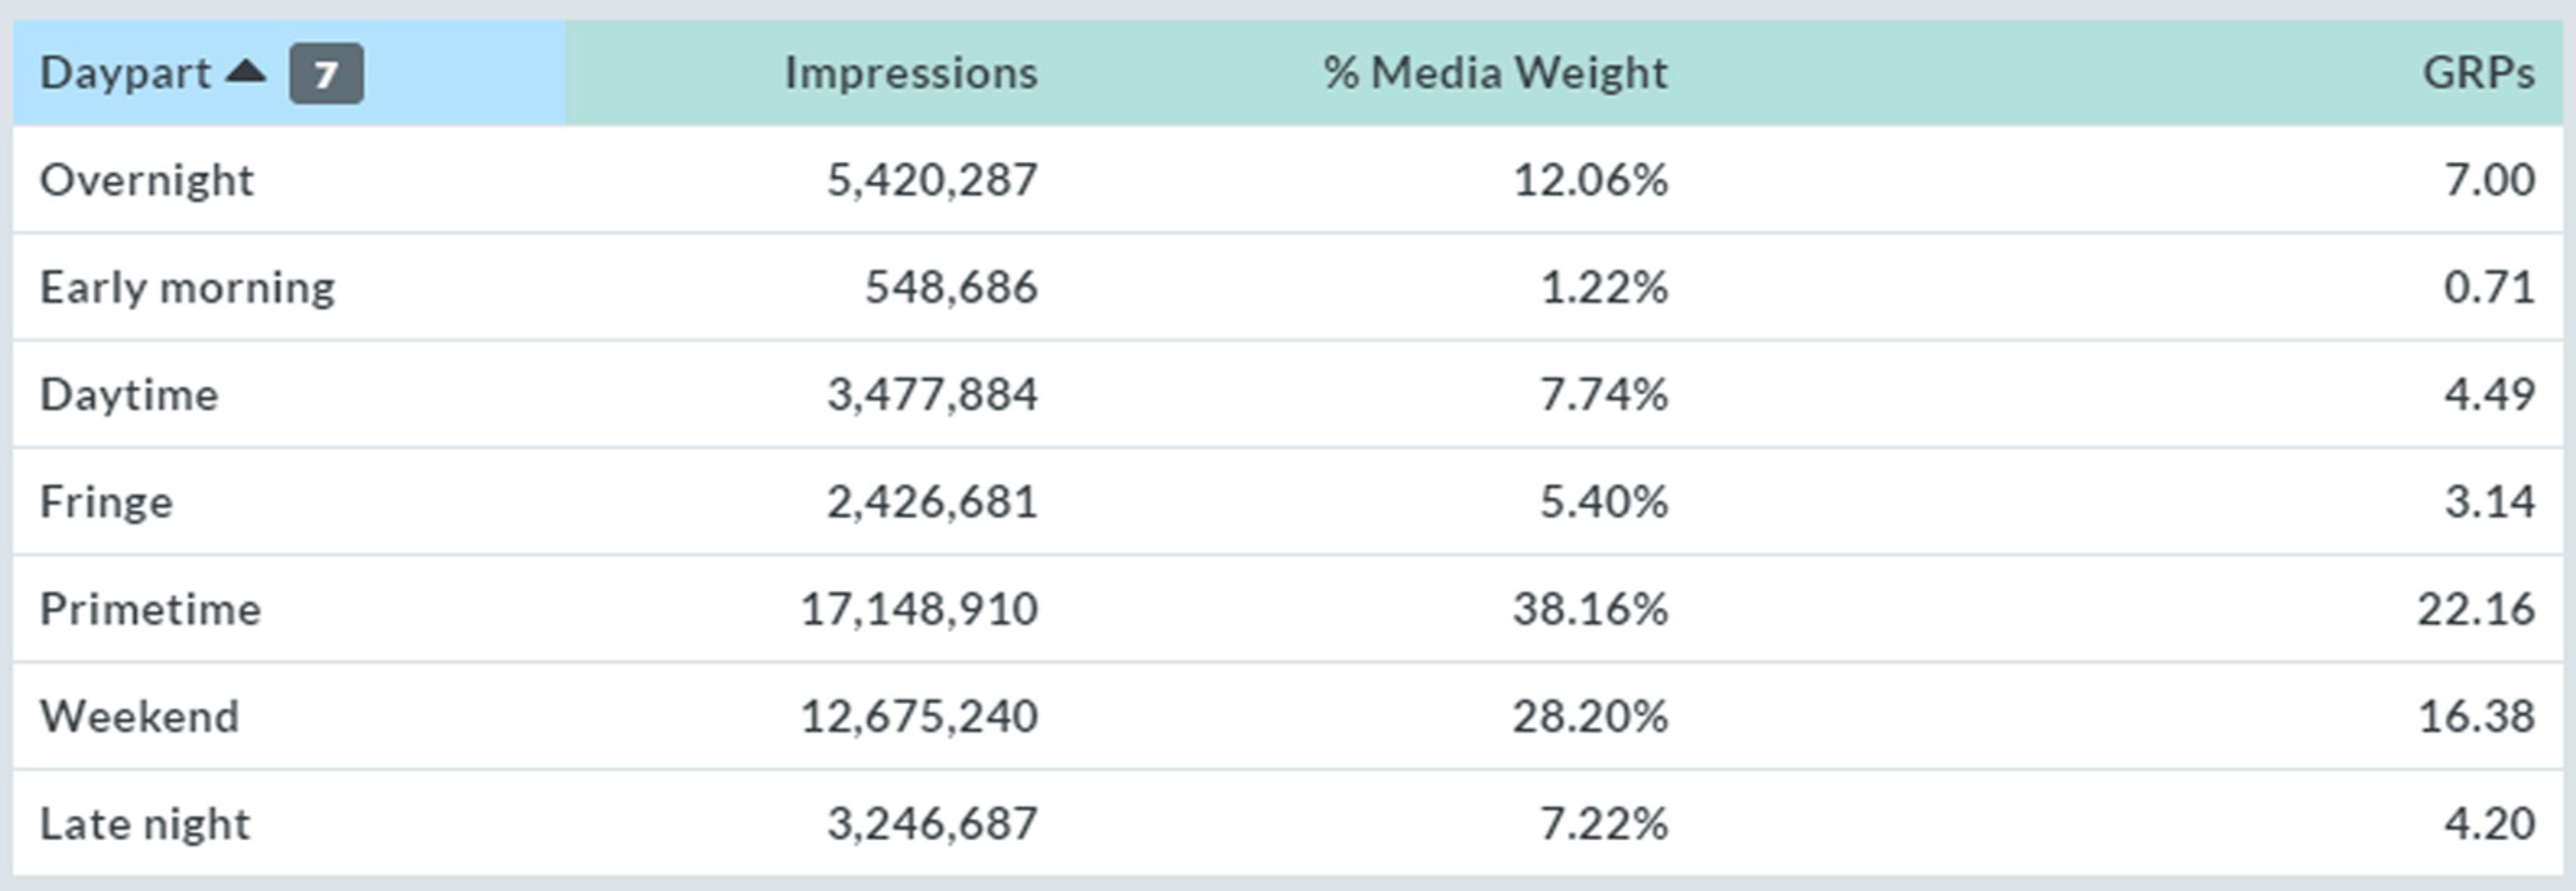 Daypart breakdown showing impressions, % media budget, and GRPs.